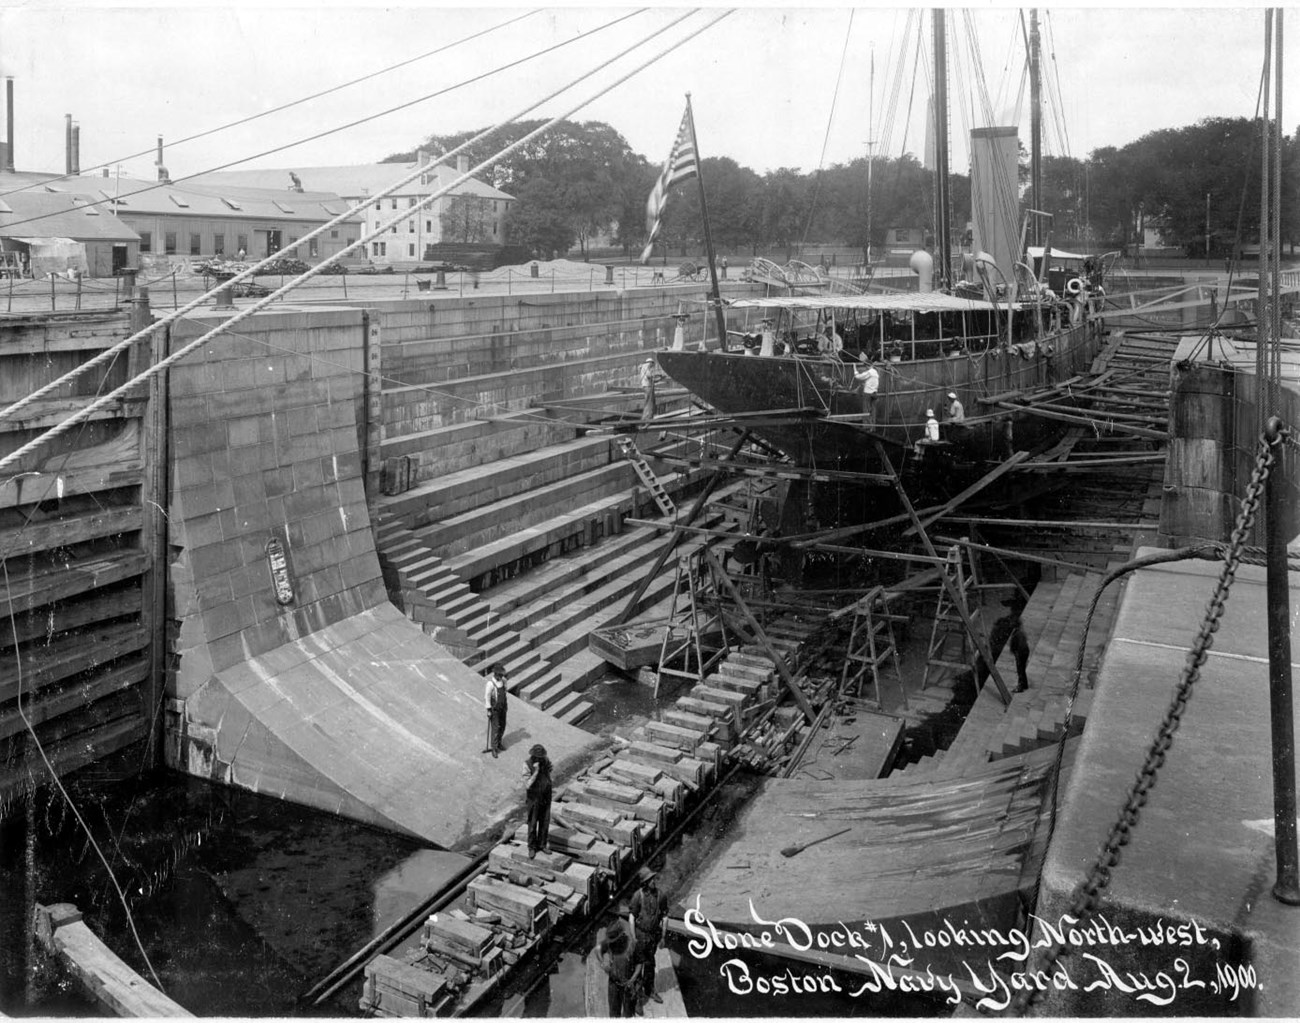 a ship being worked on in Dry Dock 1